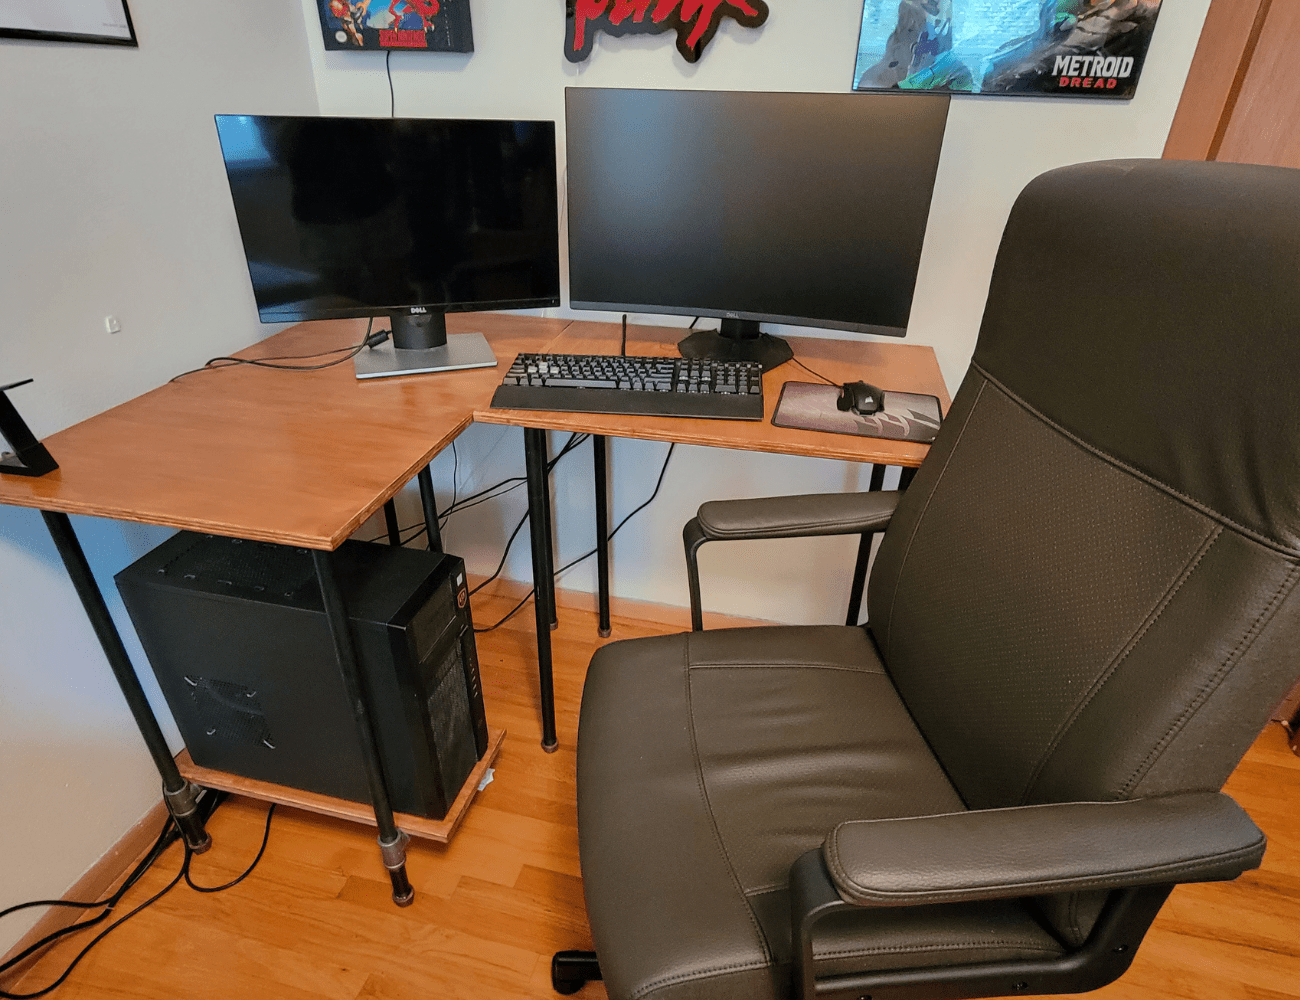 Homemade Industrial Style Gaming Desk - The Daily DIY